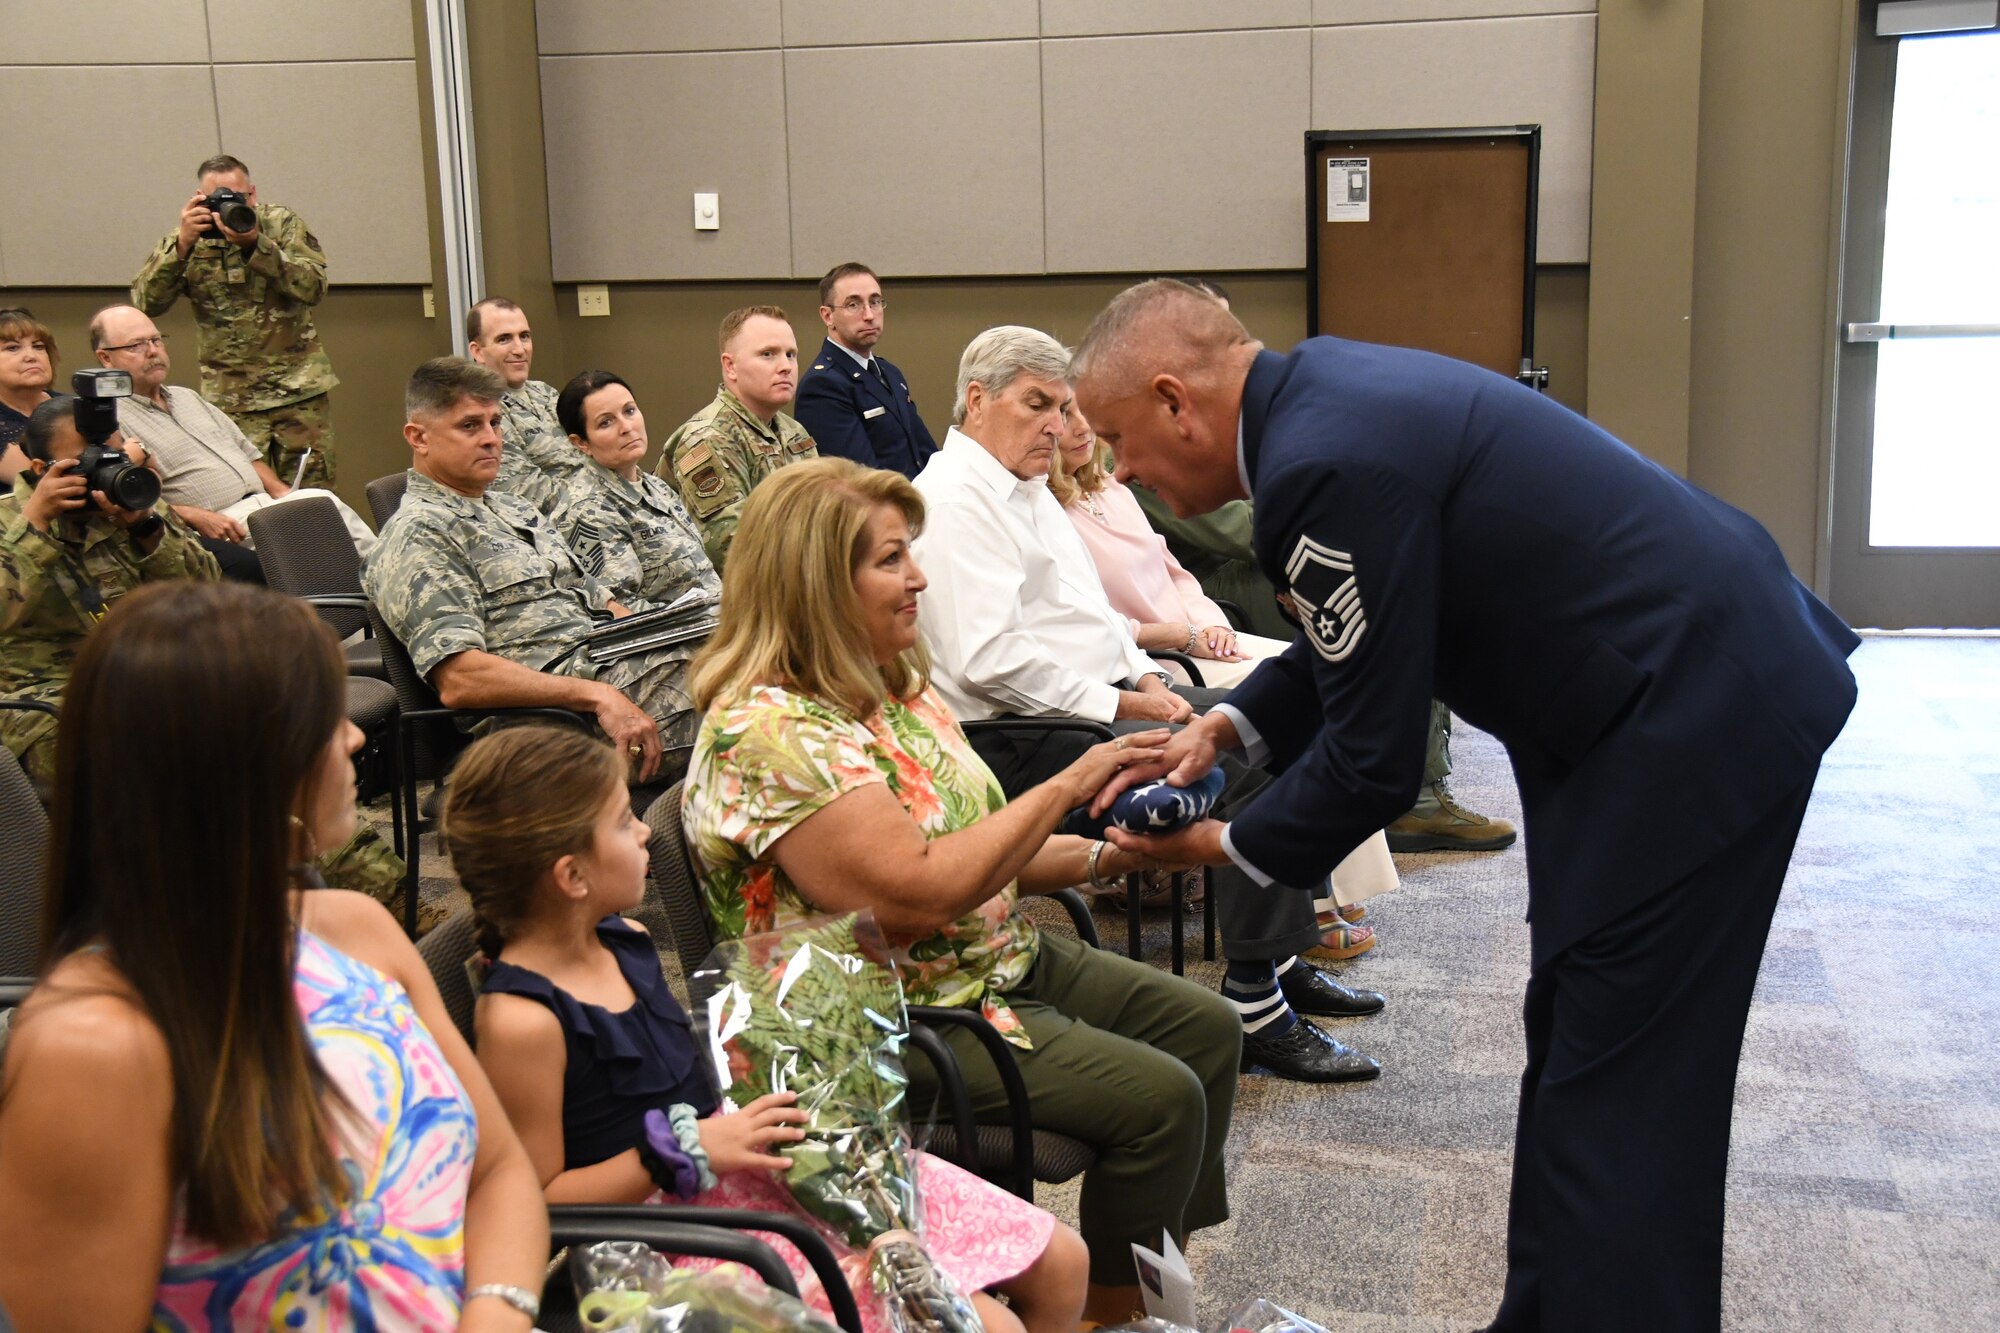 Senior Master Sgt. William Bassett retired from the 932nd Airlift Wing in a ceremony held August 4, 2019 at Scott Air Force Base, Ill.  He was presented the American flag which he presented to his family,  He took a few moments to thank everyone, looked at a list of all the generals he's served under, and touched on the legacy of the 932nd Airlift Wing that he's been a part of since 2005. "Always dream big, and always be a good mentor. It means something. There are so many friends you meet along the way, but they have no idea how much they impacted your life, and you can impact someone's life too," Bassett said. (U.S. Air Force photo by Lt. Col. Stan Paregien)